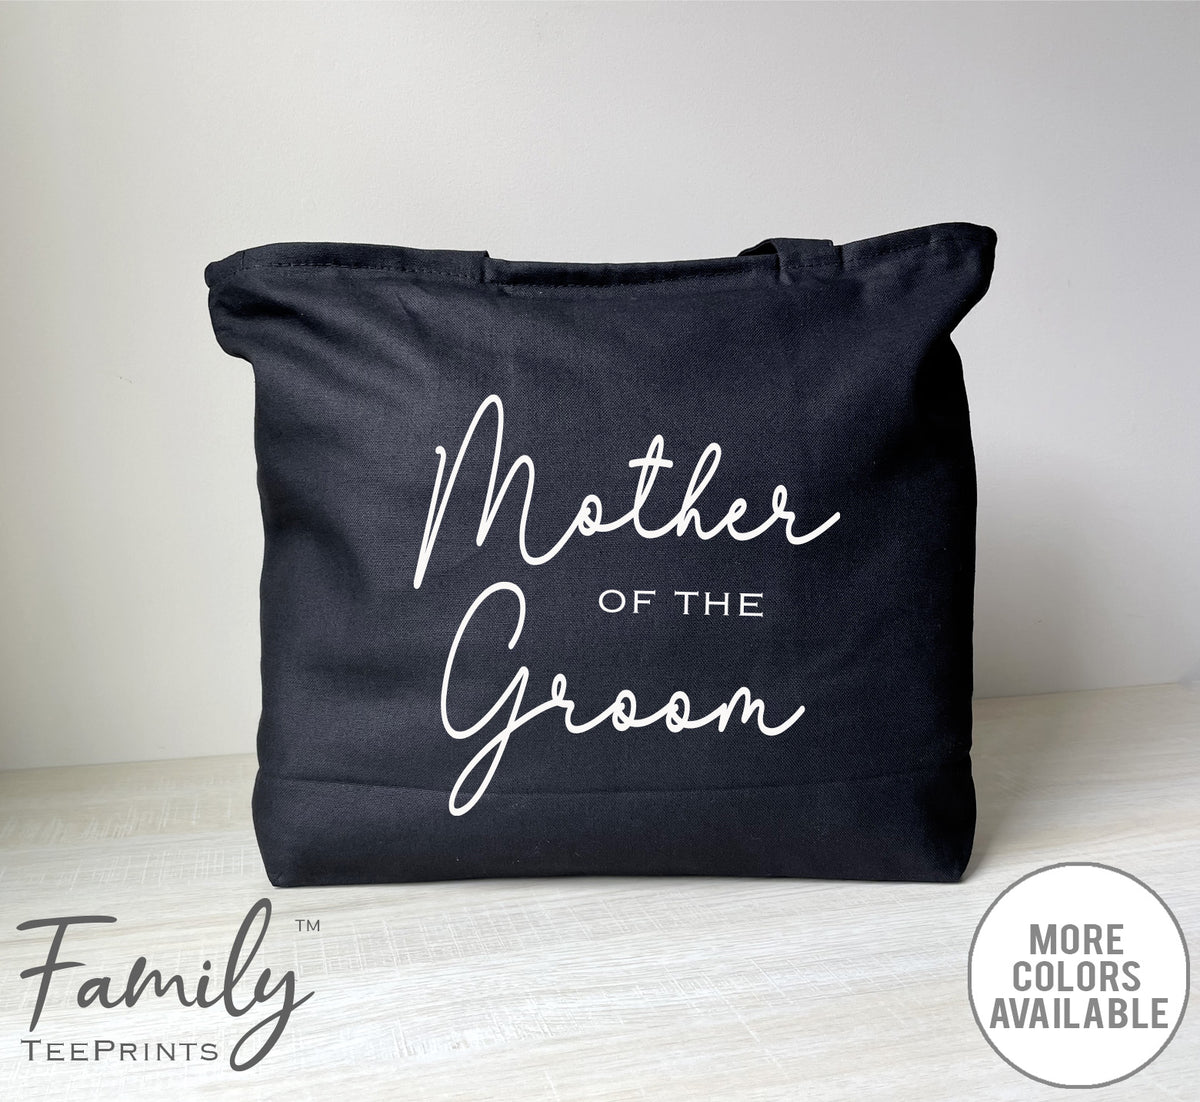 Mother Of The Groom -Zippered Tote Bag - Mother Of The Groom Bag - Mother Of The Groom Gift - familyteeprints